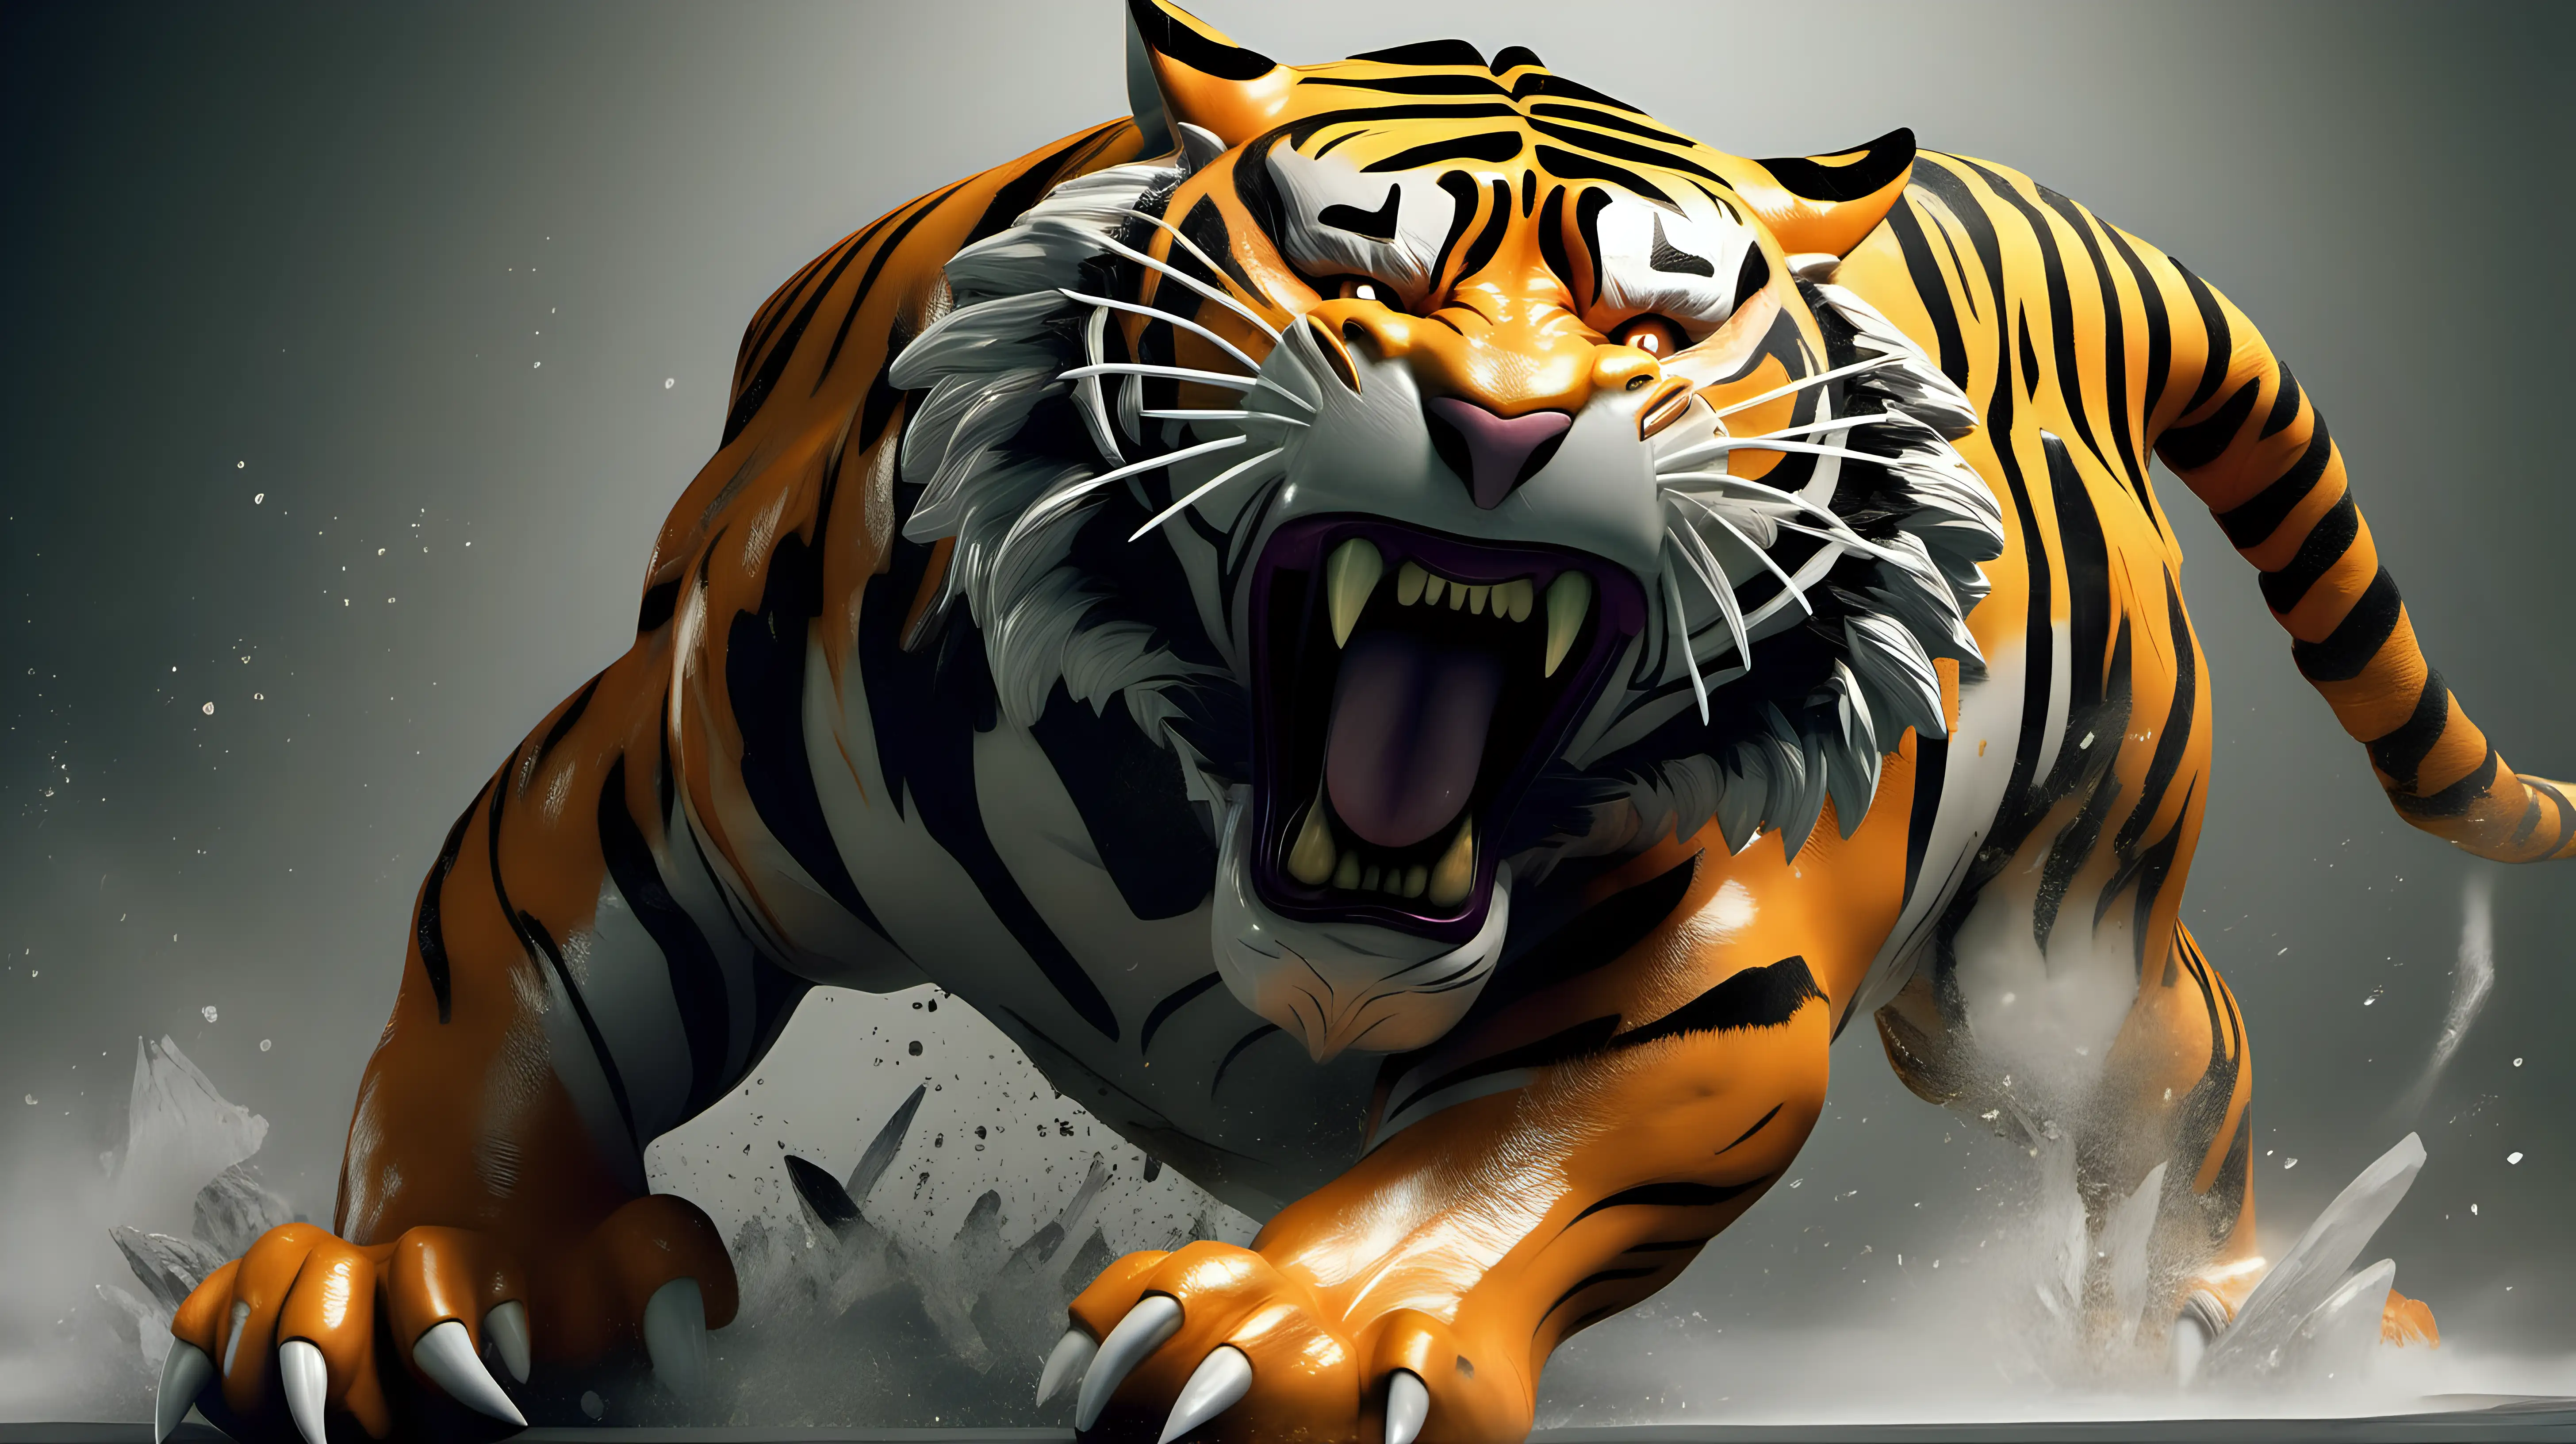 Dynamic Tiger Roaring Magnificent Predator Showing Strength and Ferocity